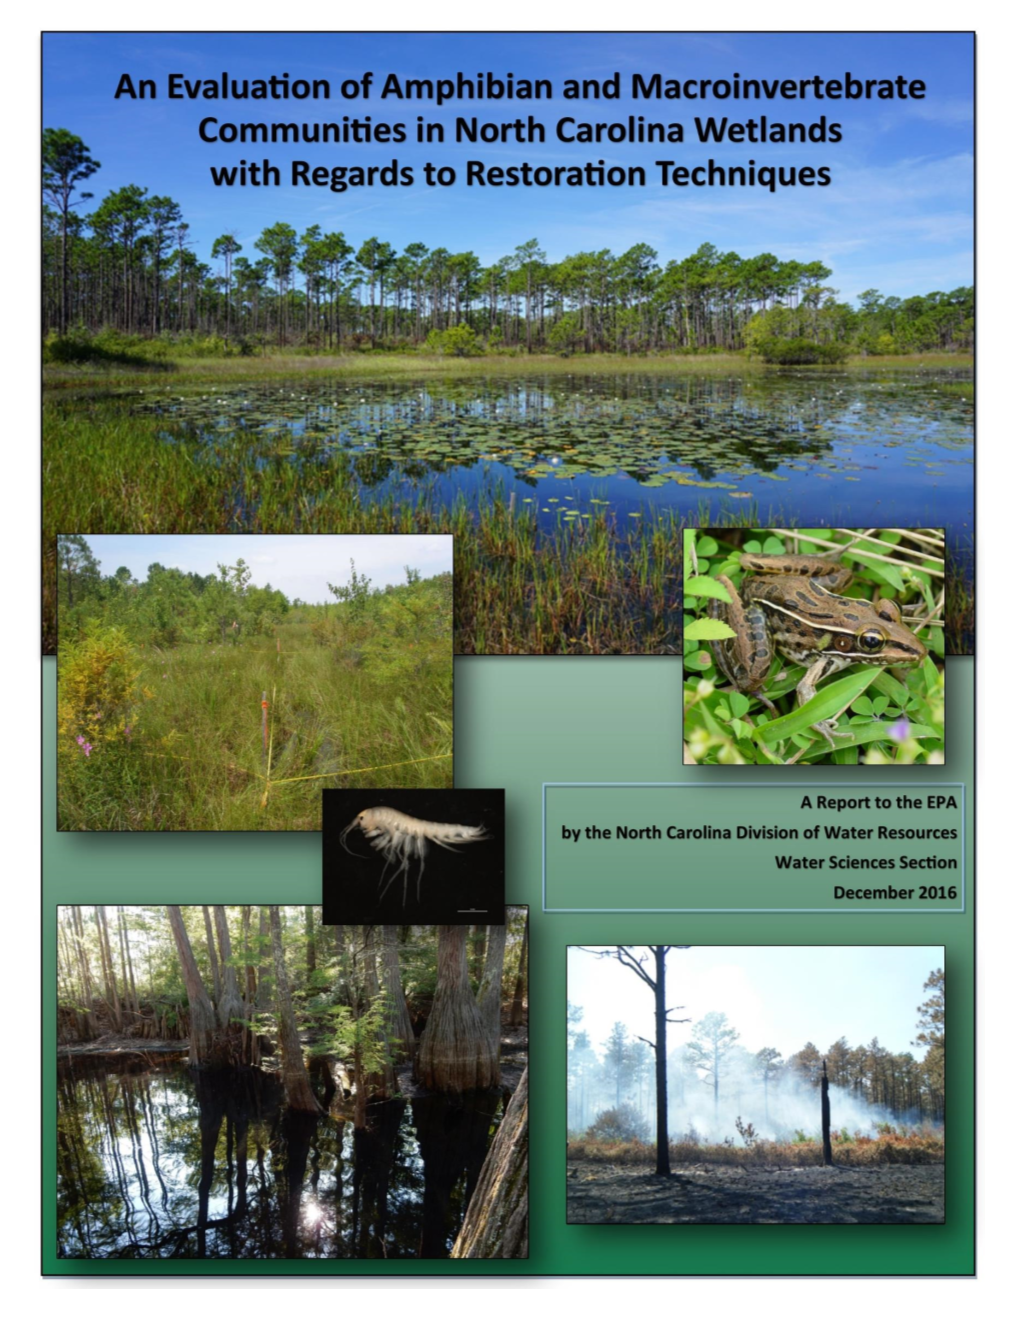 An Evaluation of Amphibian and Macroinvertebrate Communities in North Carolina Wetlands with Regards to Restoration Techniques